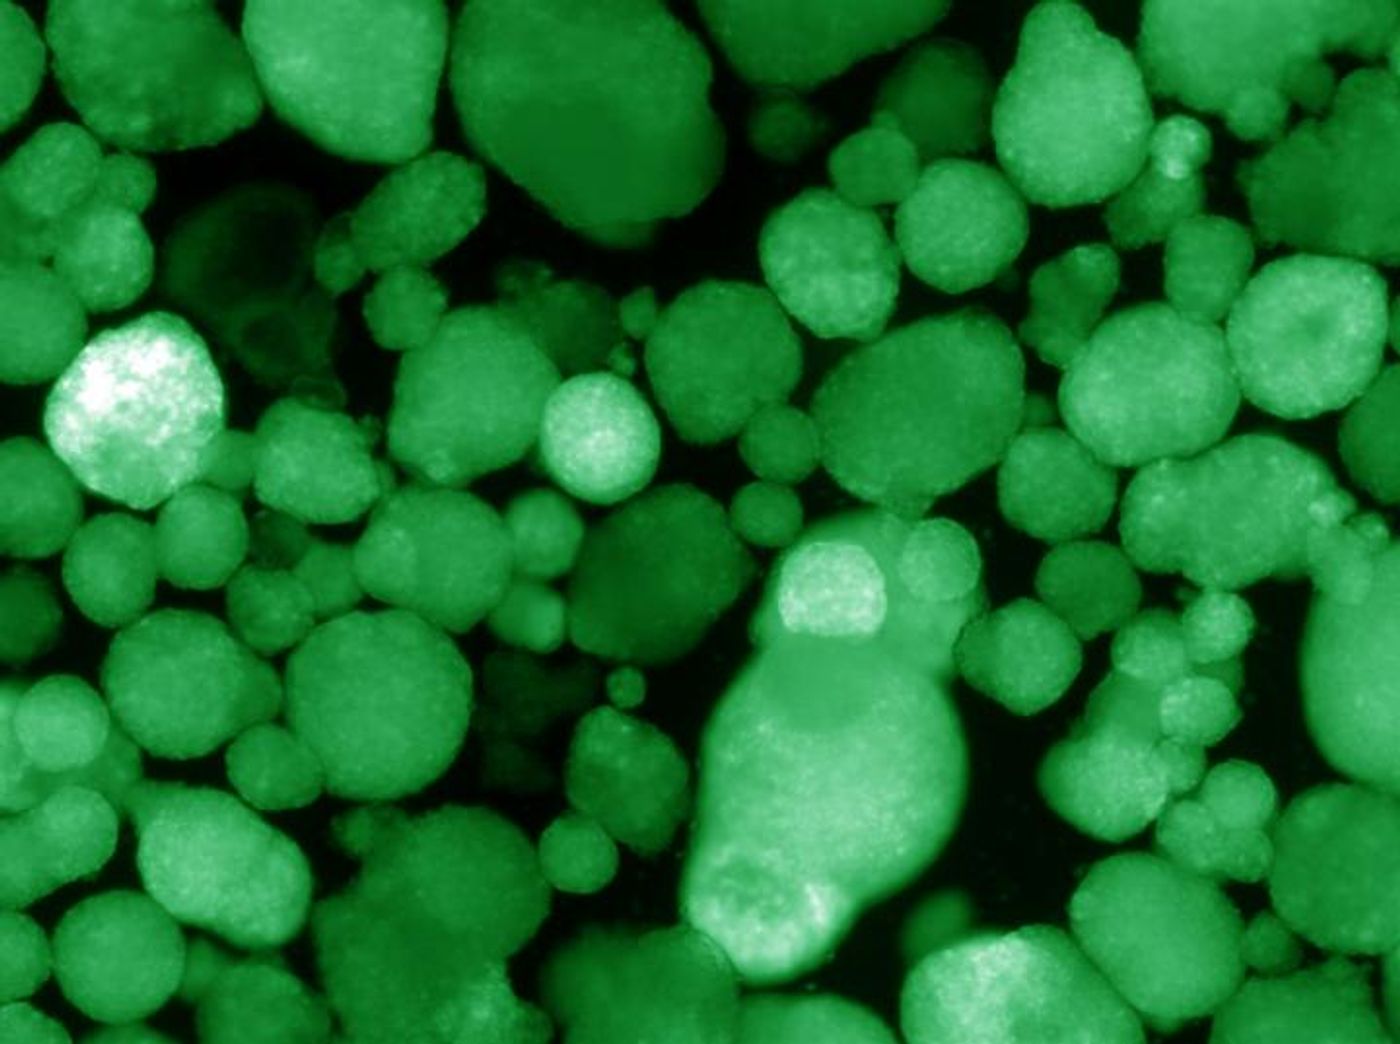 Shown here, human islet-like organoids express insulin, which is indicated by the green color. / Credit: Salk Institute